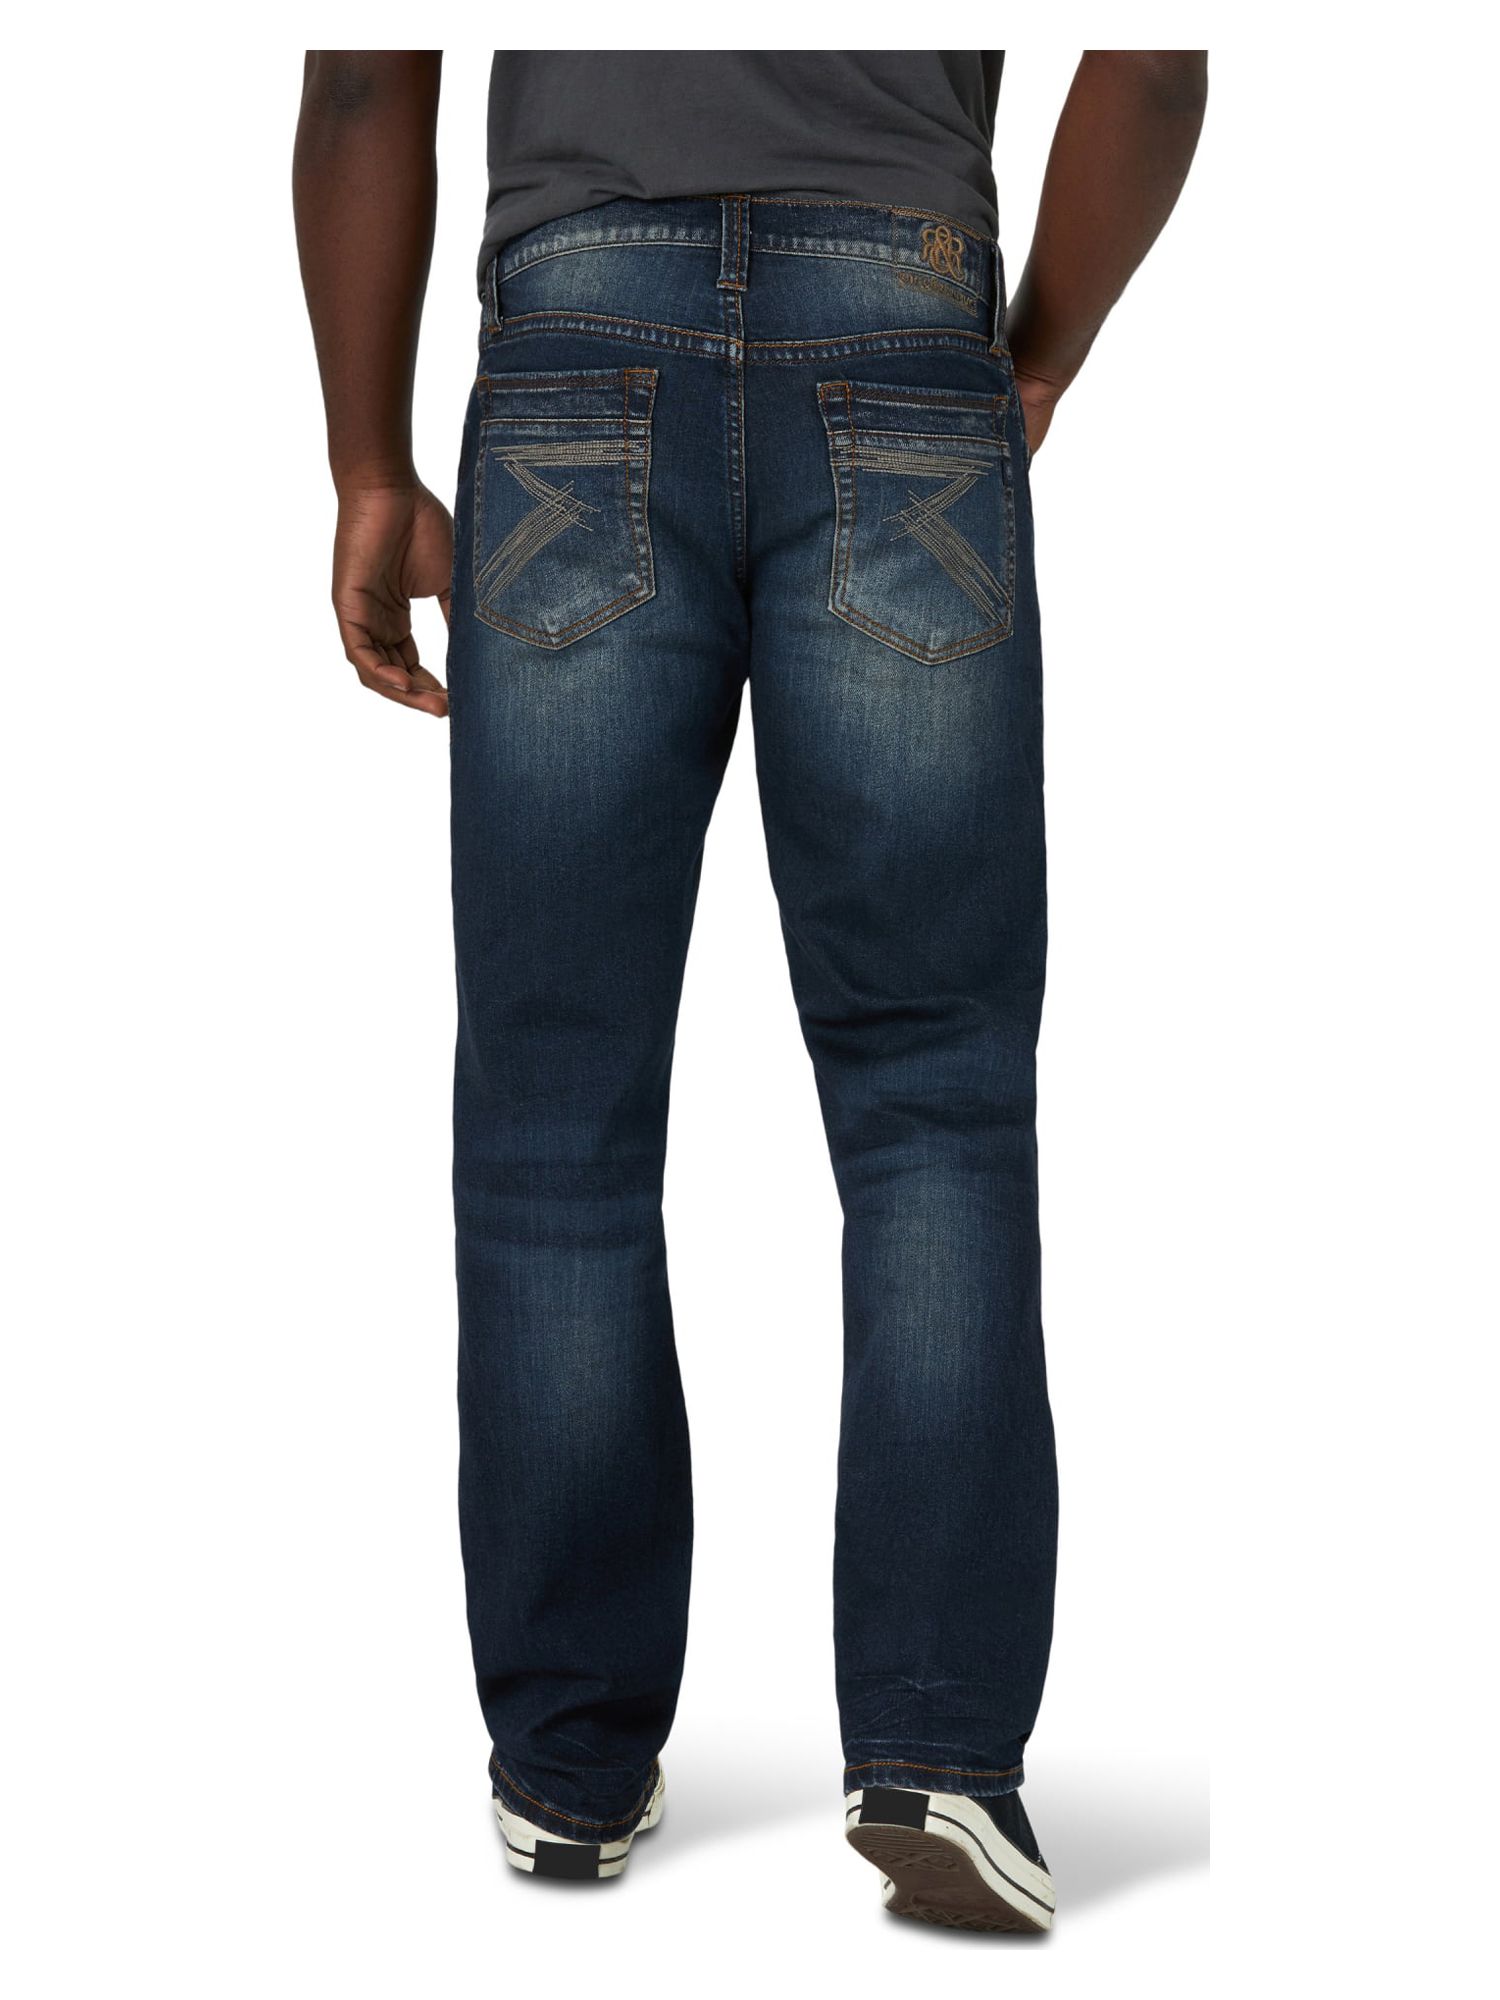 Rock & Republic Men's Relaxed Straight Leg Jean with Ultra Comfort Denim - image 4 of 6